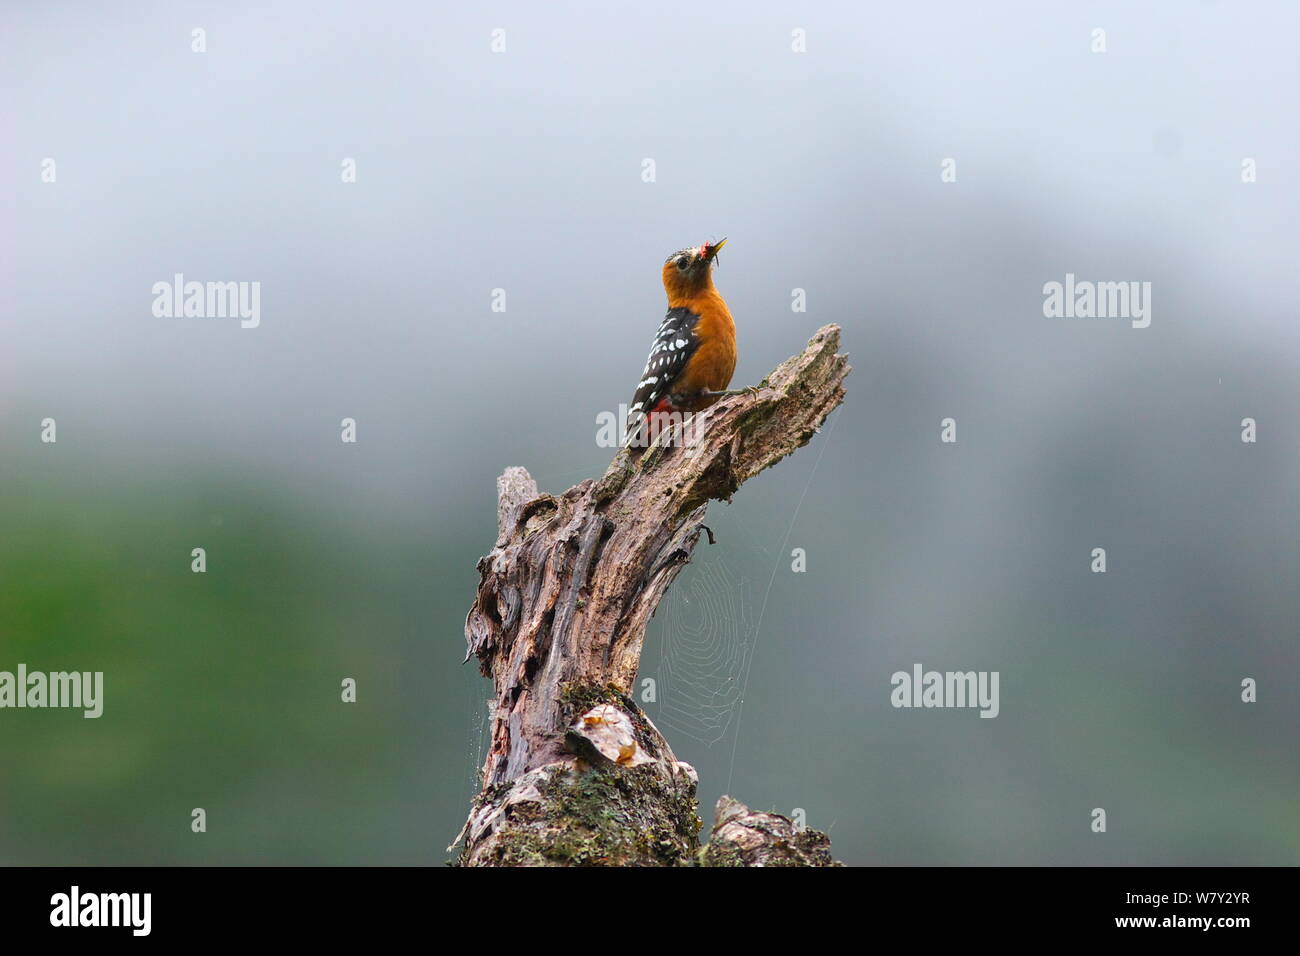 Rufous-bellied Woodpecker (Dendrocopos hyperythrus) with insect prey in beak, perched on snag, Kawakarpo Mountain, Meri Snow Mountain National Park, Yunnan Province, China. Stock Photo